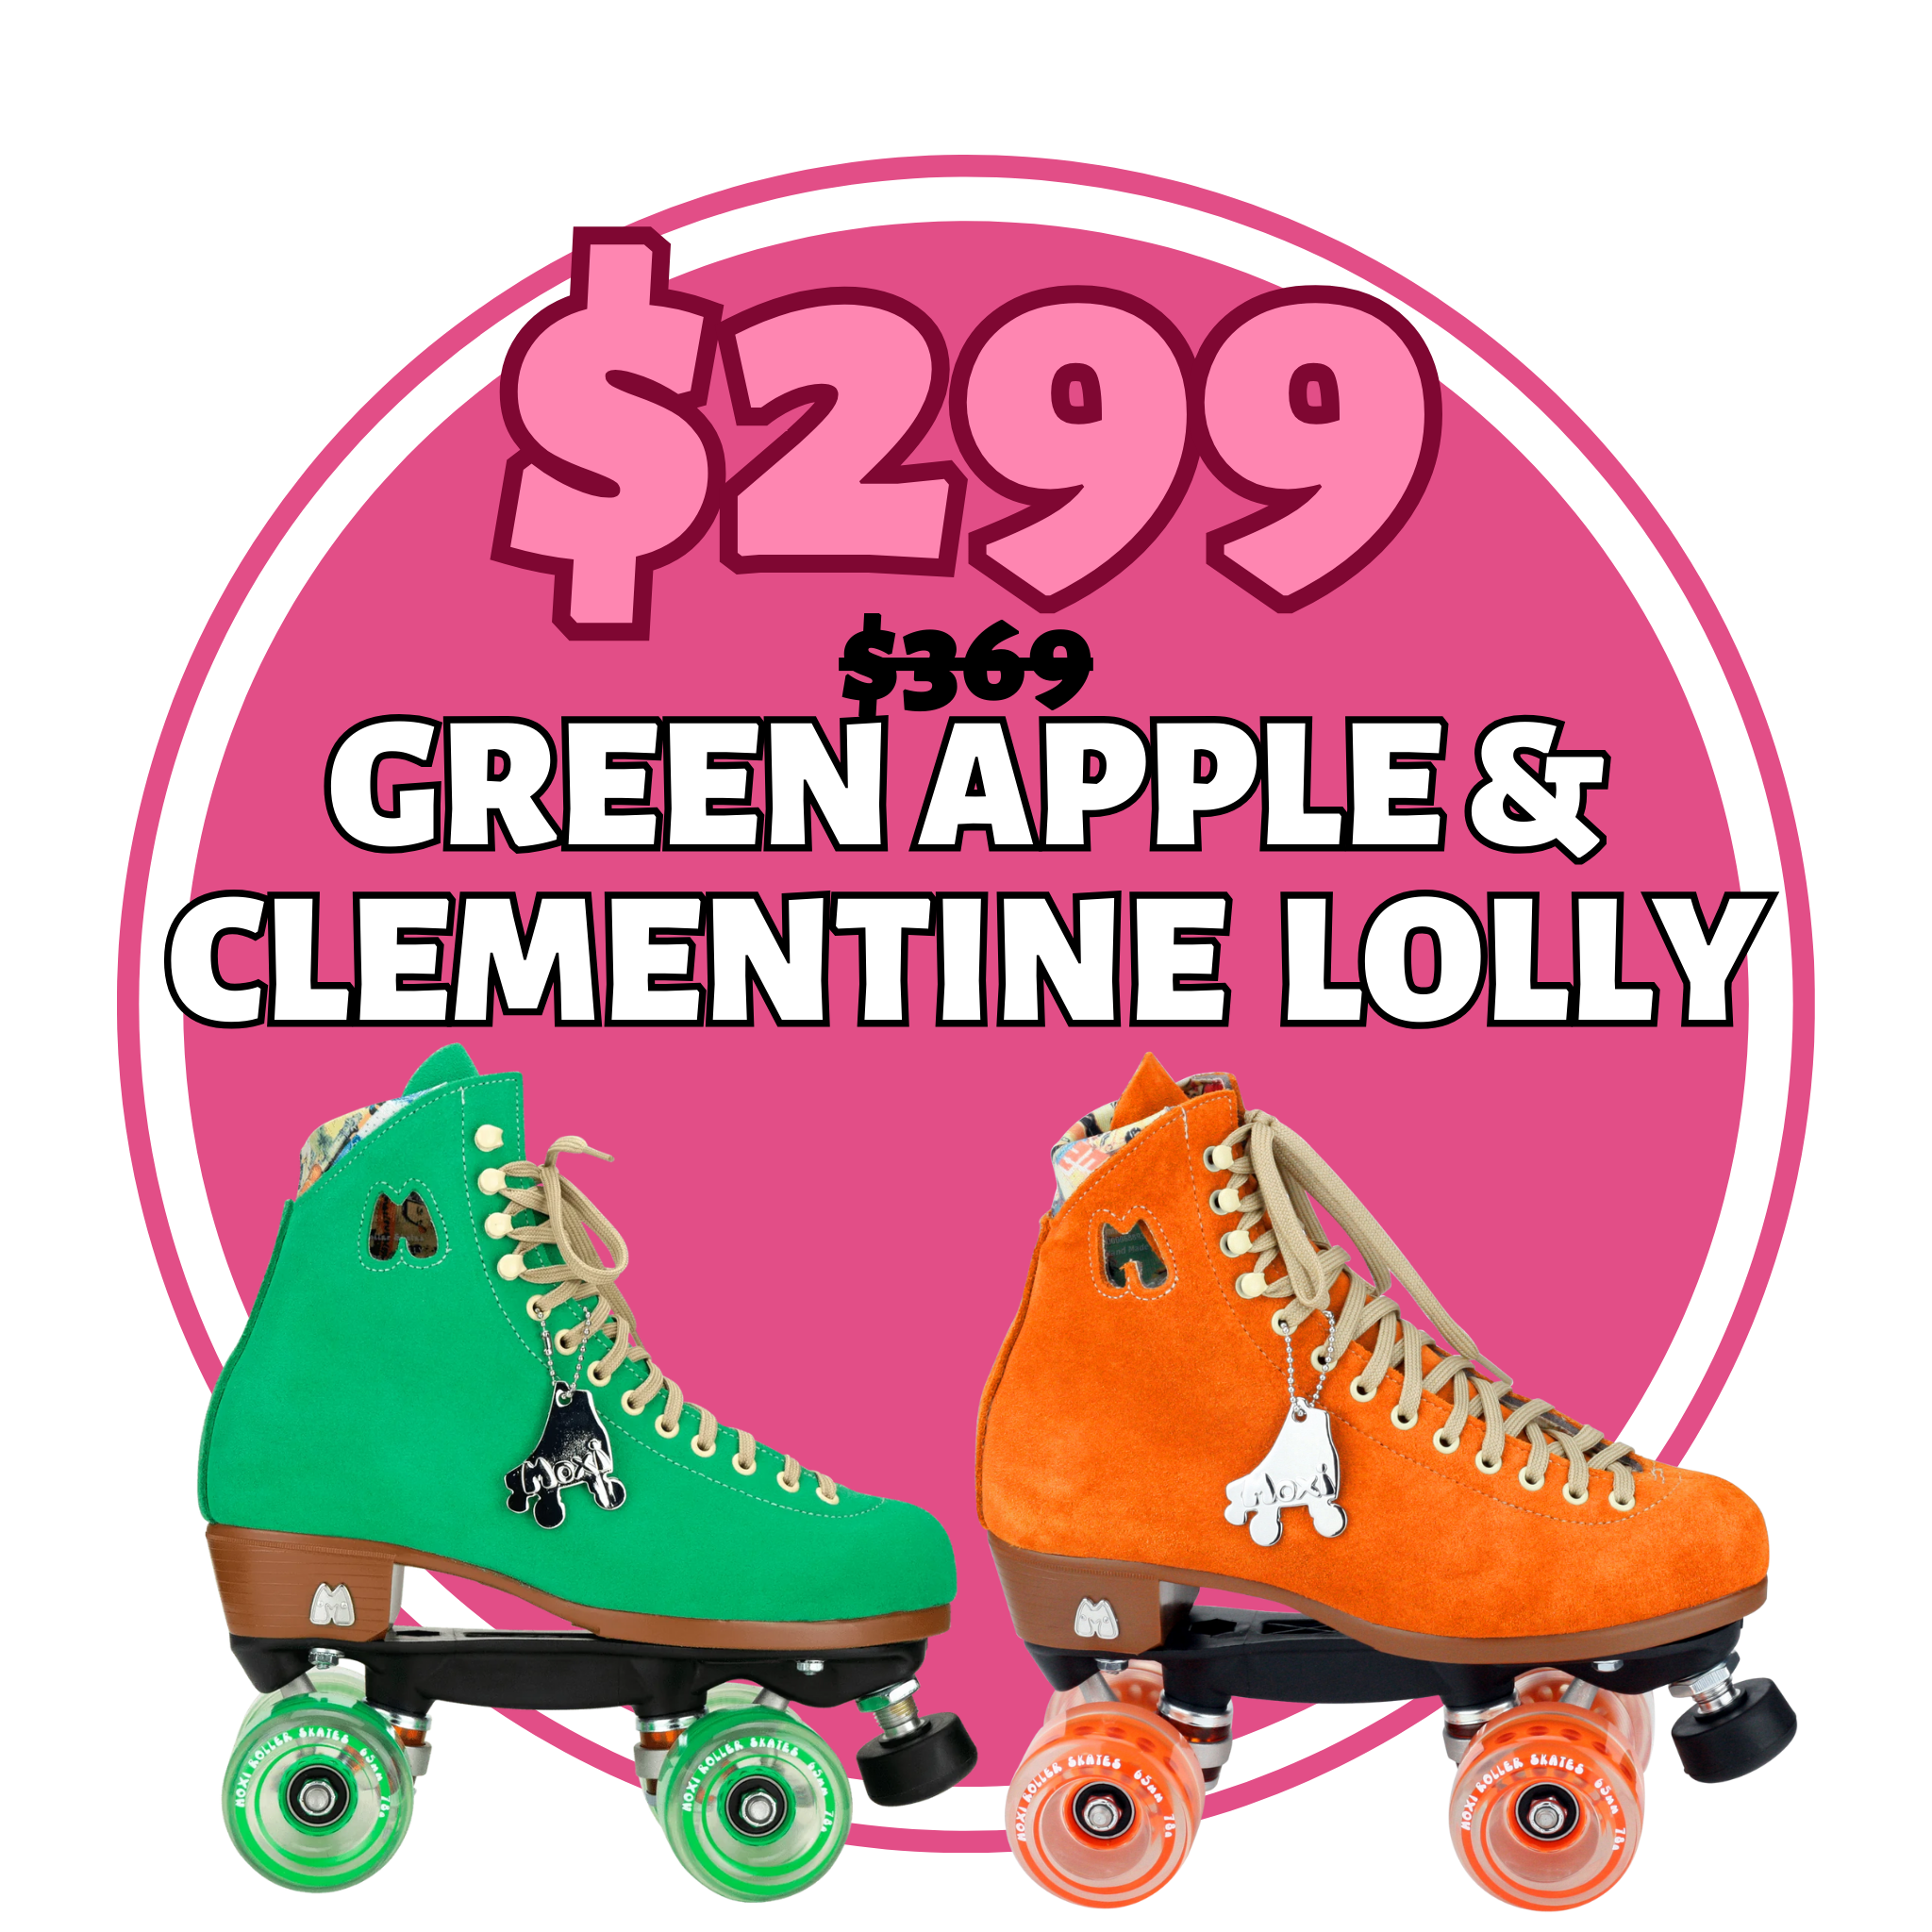 Green Apple and Clementine Lolly. Was $369, now $299